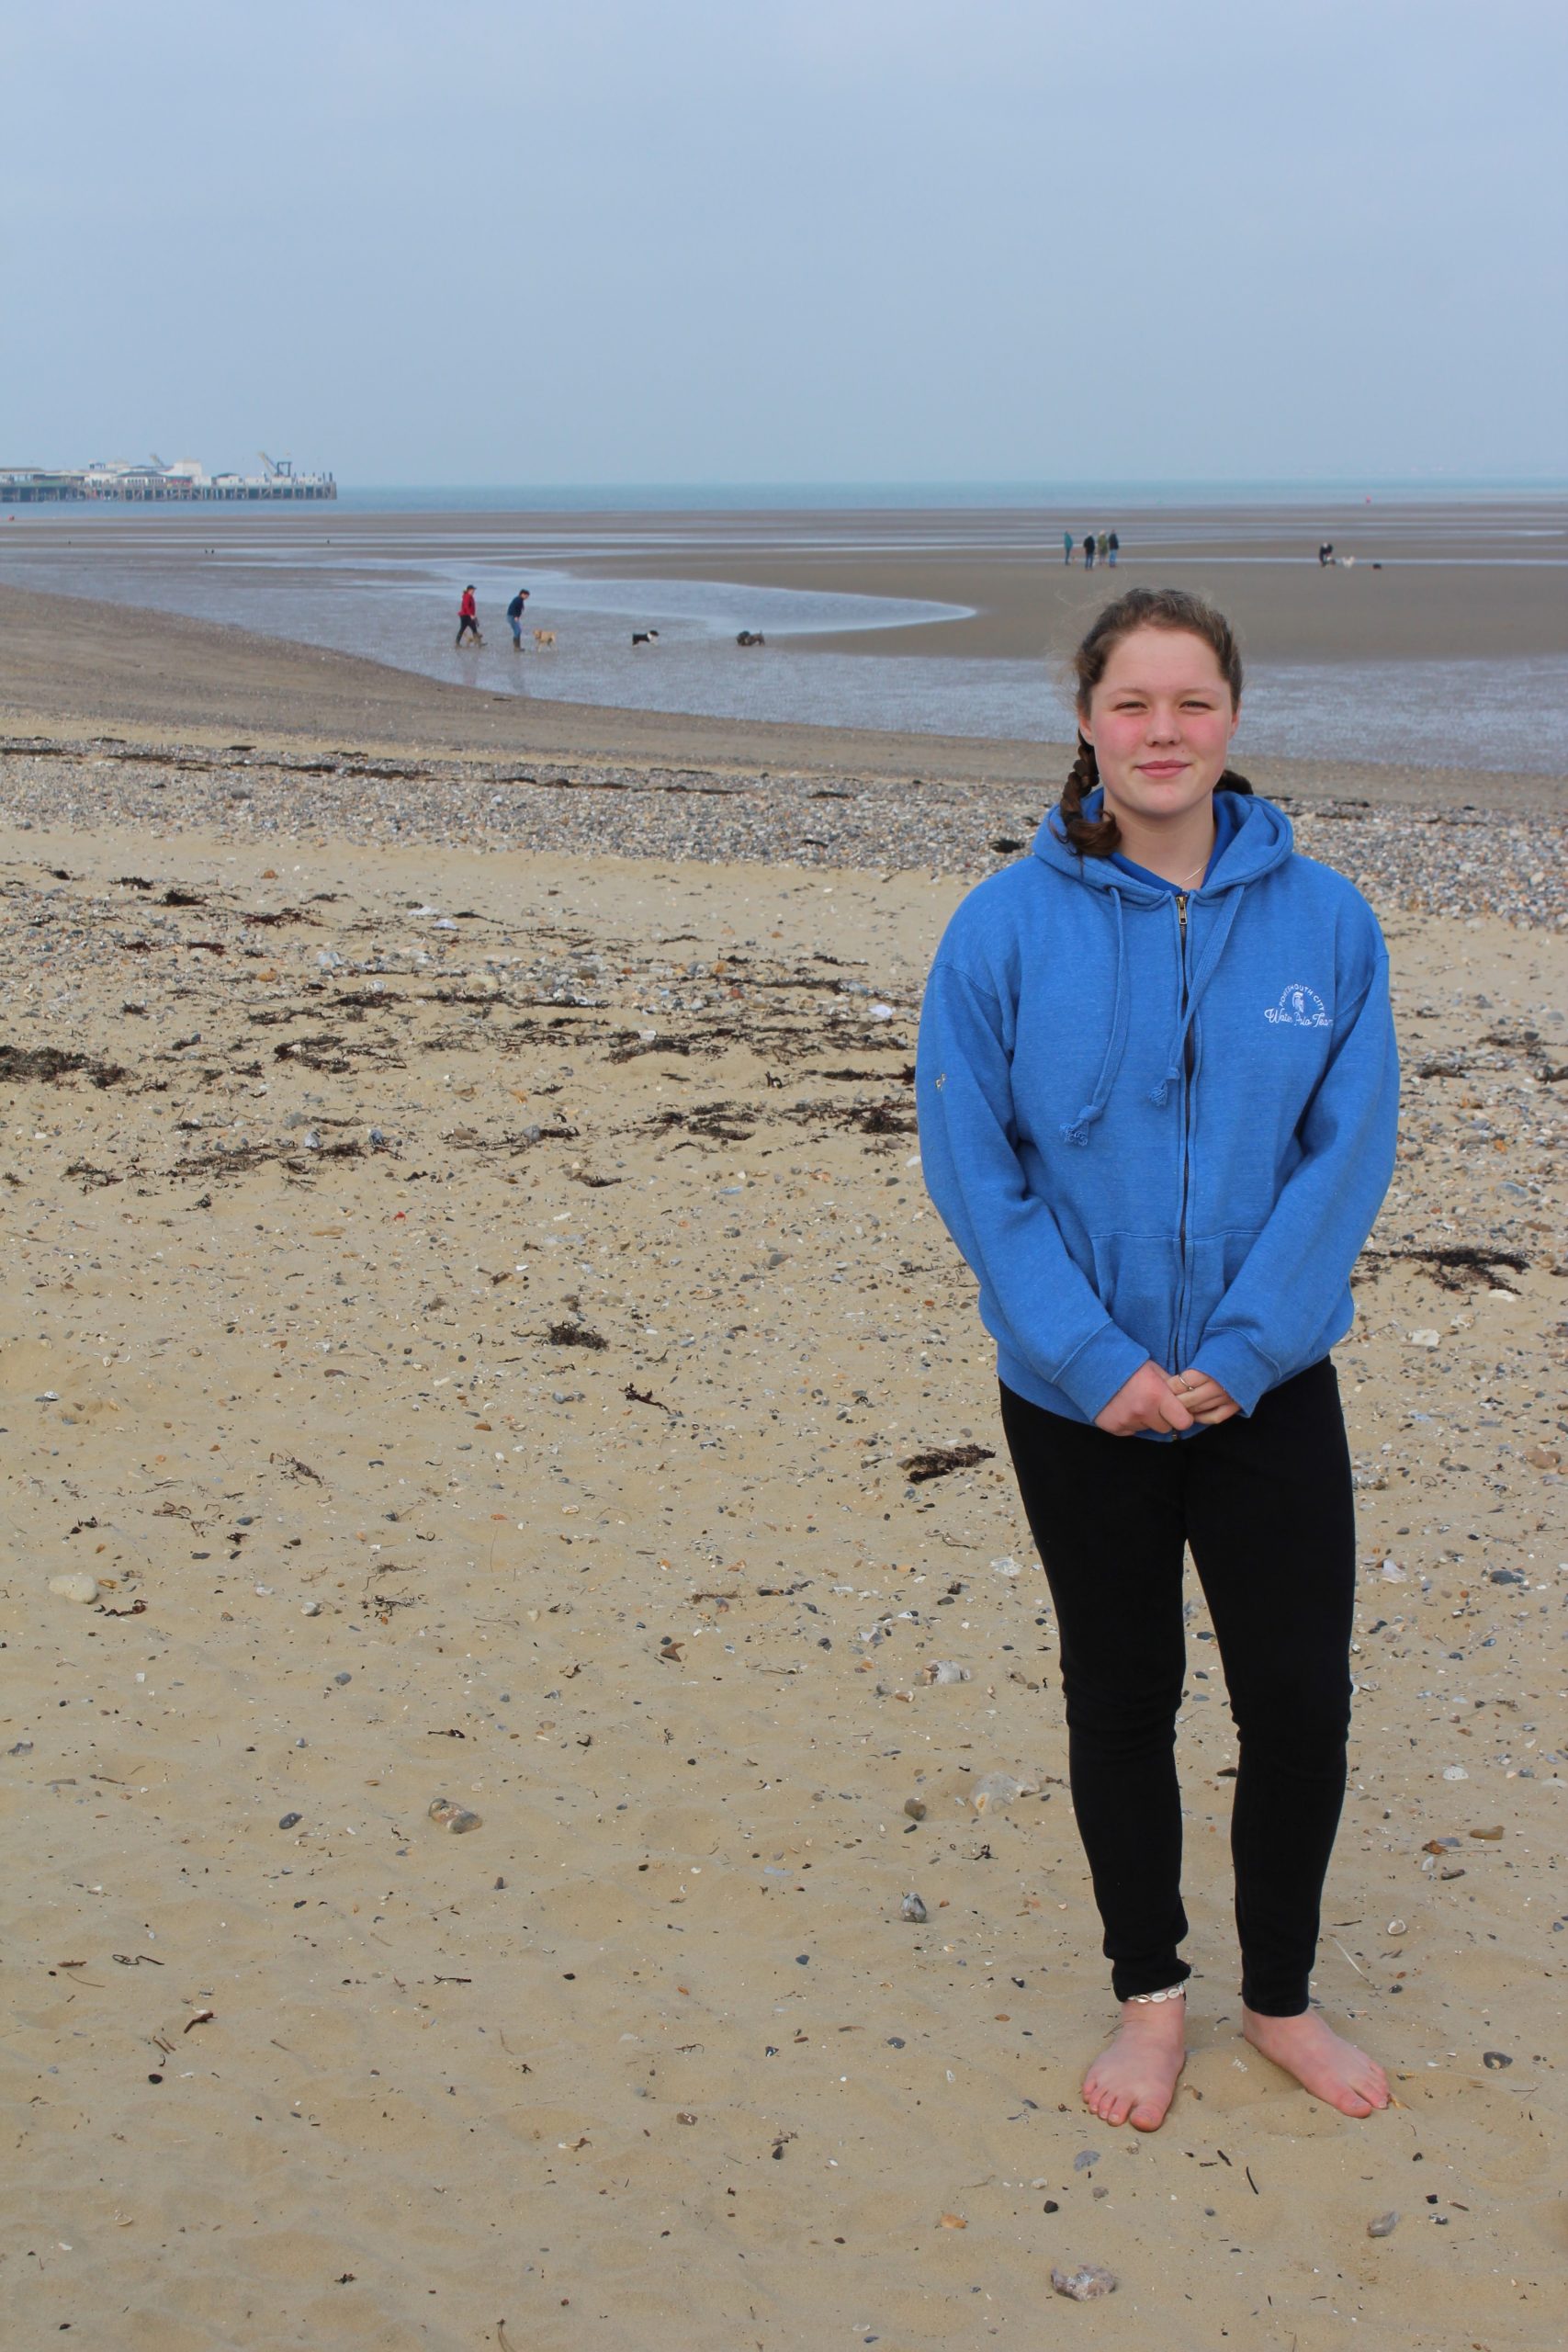 Skye Priede, Talented Athlete on the beach on the Isle of Wight